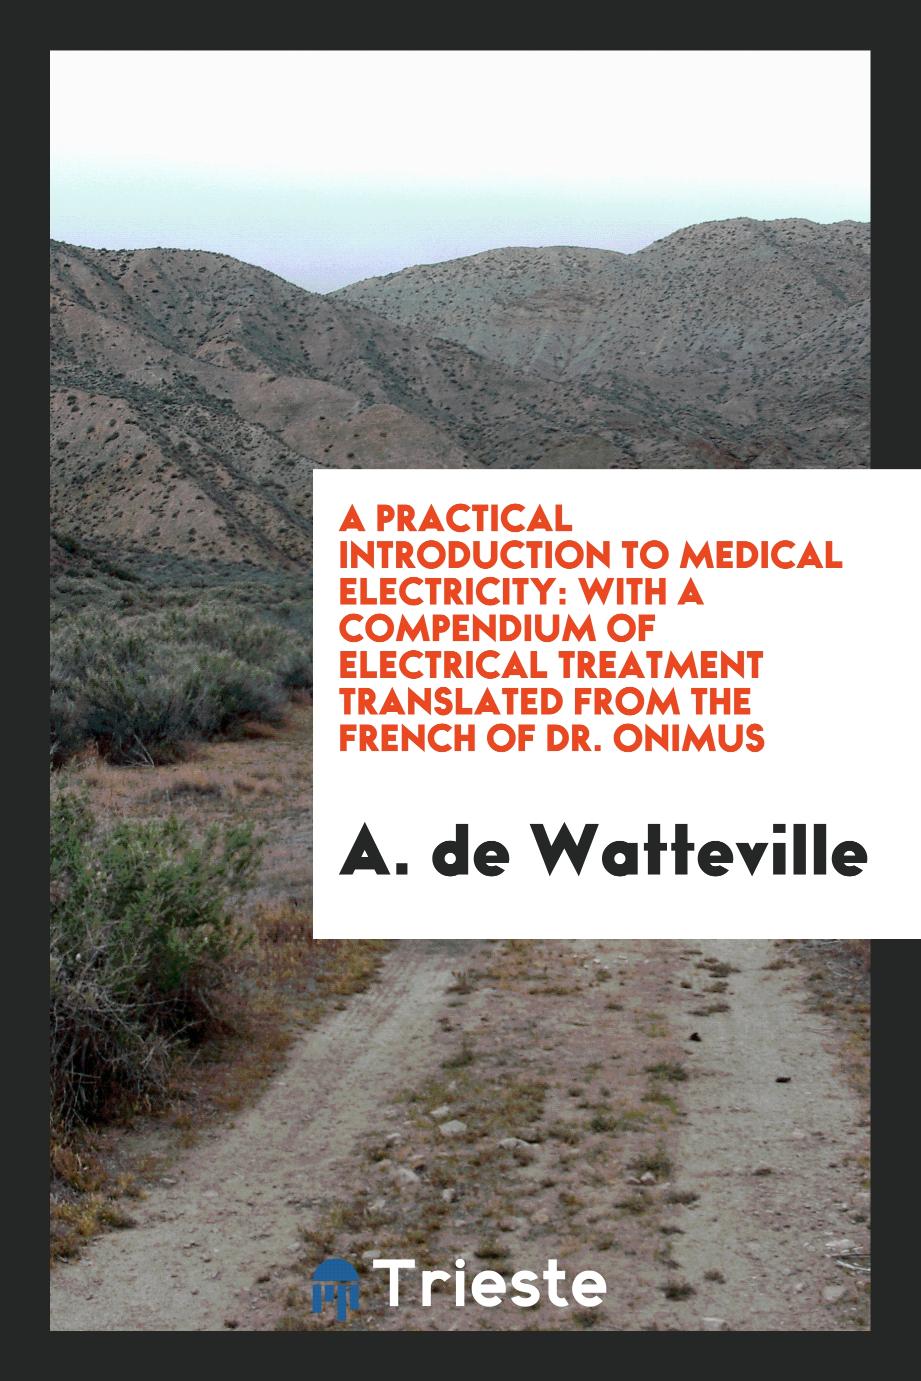 A Practical Introduction to Medical Electricity: With a Compendium of Electrical Treatment Translated from the French of Dr. Onimus